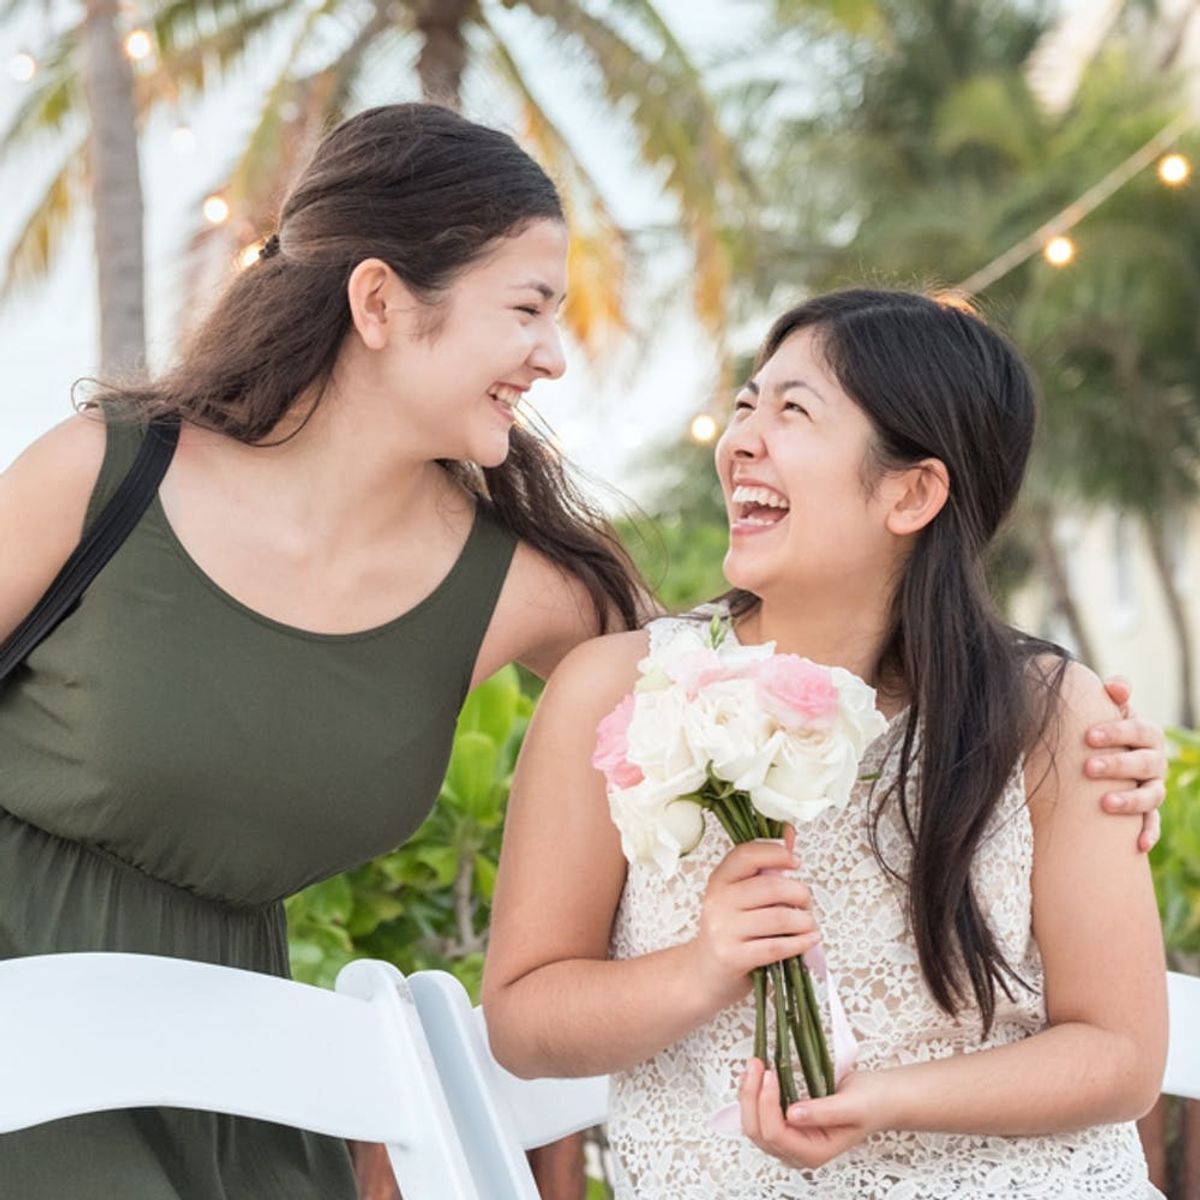 5 Tips to Survive Wedding Season Without Going Broke